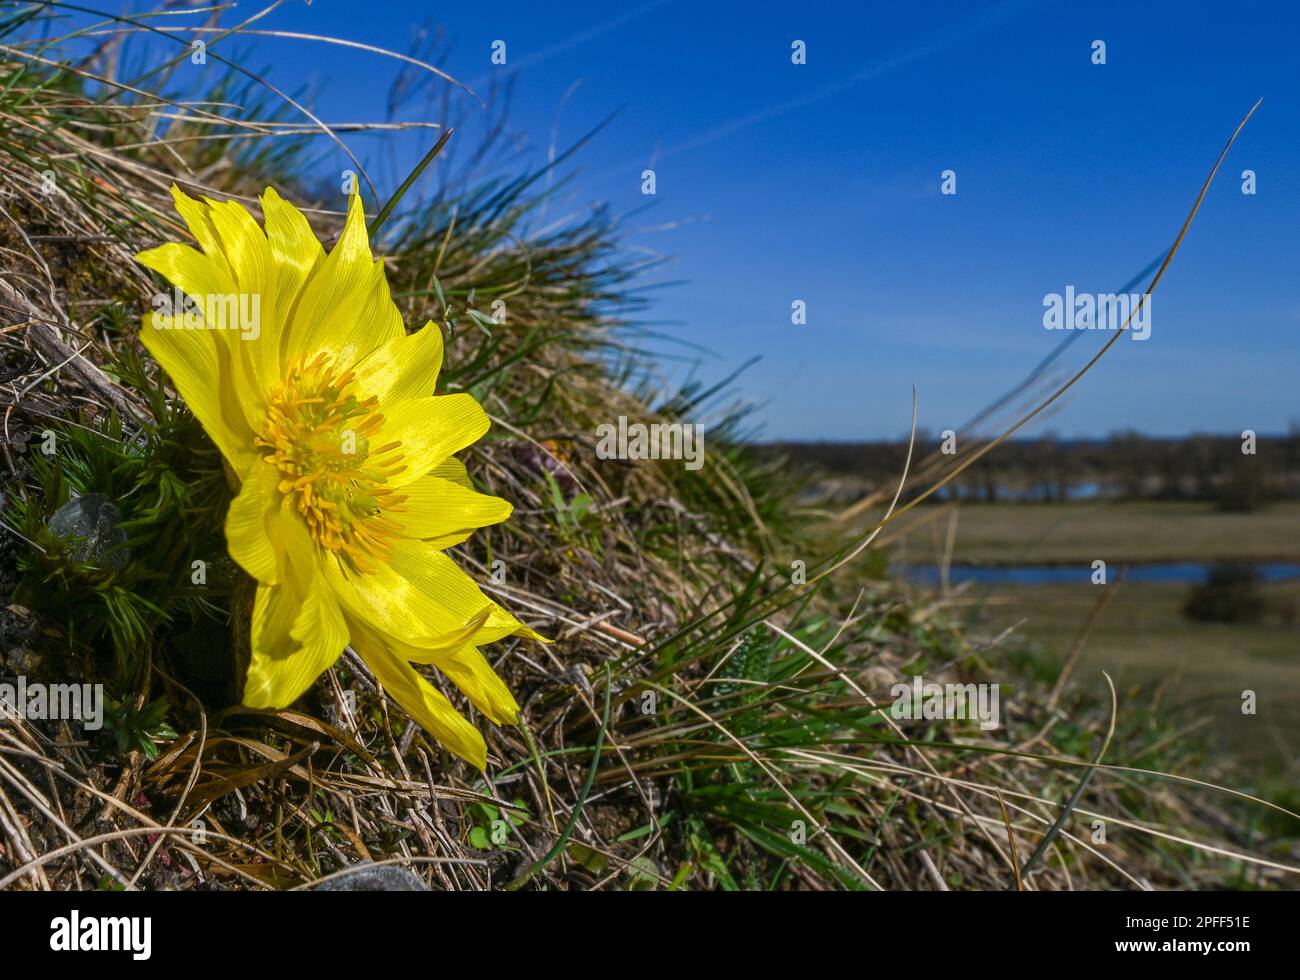 16 March 2023, Brandenburg, Lebus: An Adonis rose blooms on the Oder slope in the district of Märkisch-Oderland. The mild temperatures and warm sunshine of the last few days have led to the first Adonis florets blooming. The area between Lebus on the Oder and Mallnow on the Oderbruch rim in East Brandenburg is one of the largest contiguous Adonis rose areas in Europe. In Brandenburg, these strictly protected species only occur on the Pontic slopes north of Frankfurt (Oder). For the poisonous flowers, the area was declared a Trockerasen nature reserve in 1984. Photo: Patrick Pleul/dpa/ZB Stock Photo